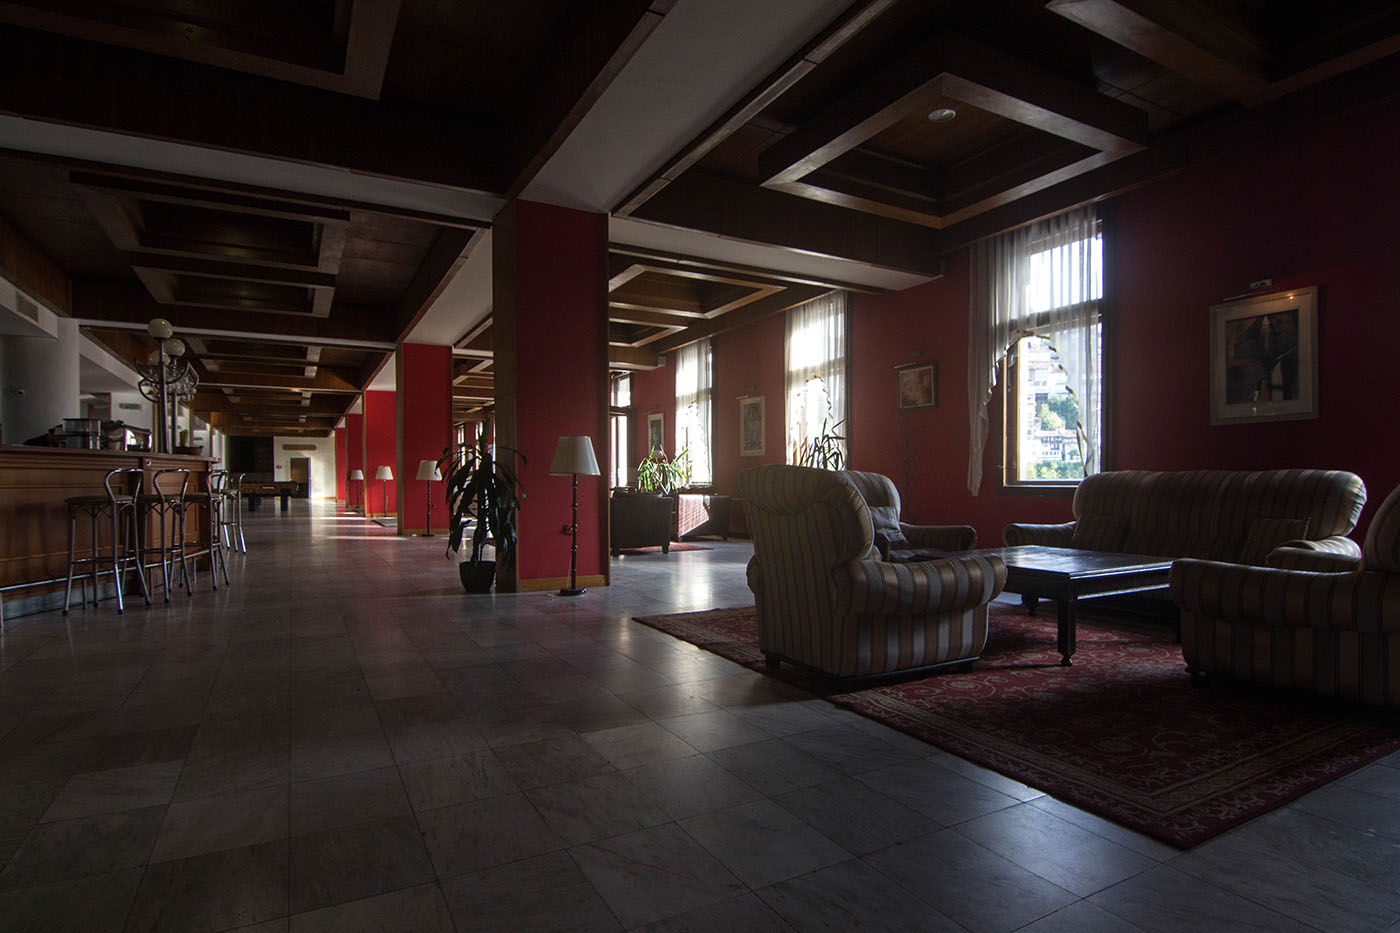 The hotel lobby decorated in dark red, with wood panelling. Interhotel Veliko Turnovo, September 2017.